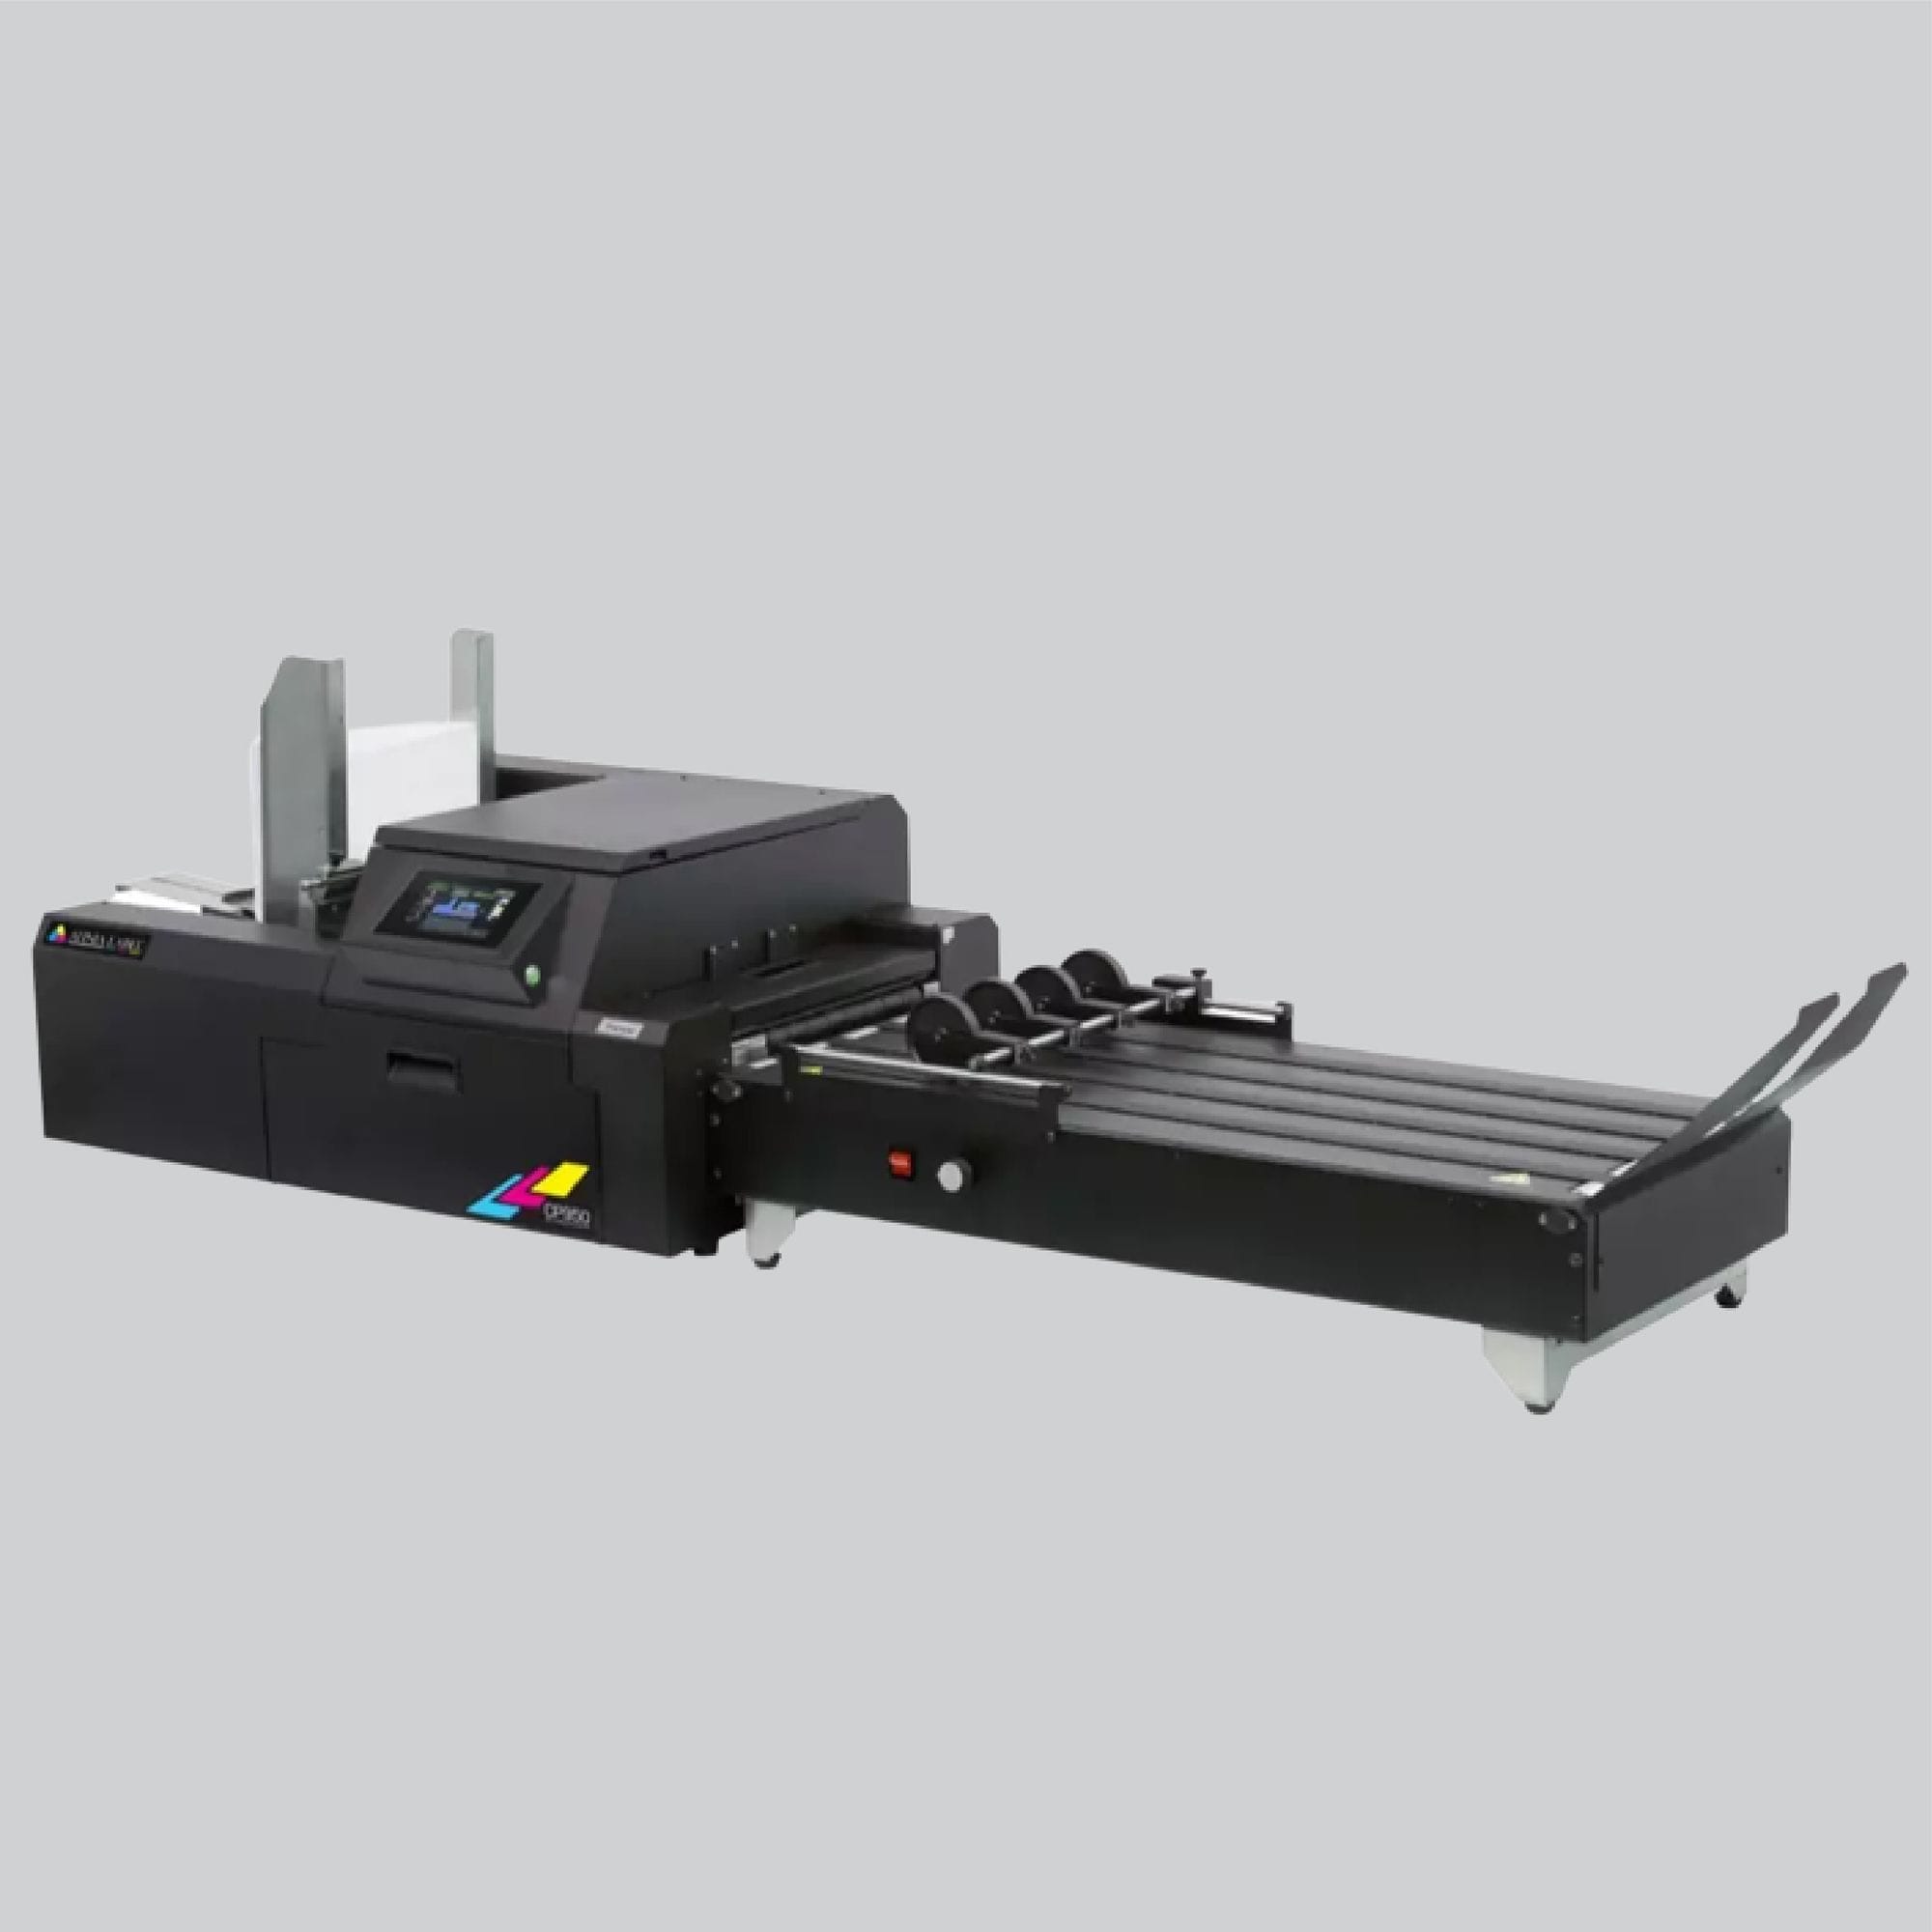 Afinia CP950 Packaging and Envelope Printer